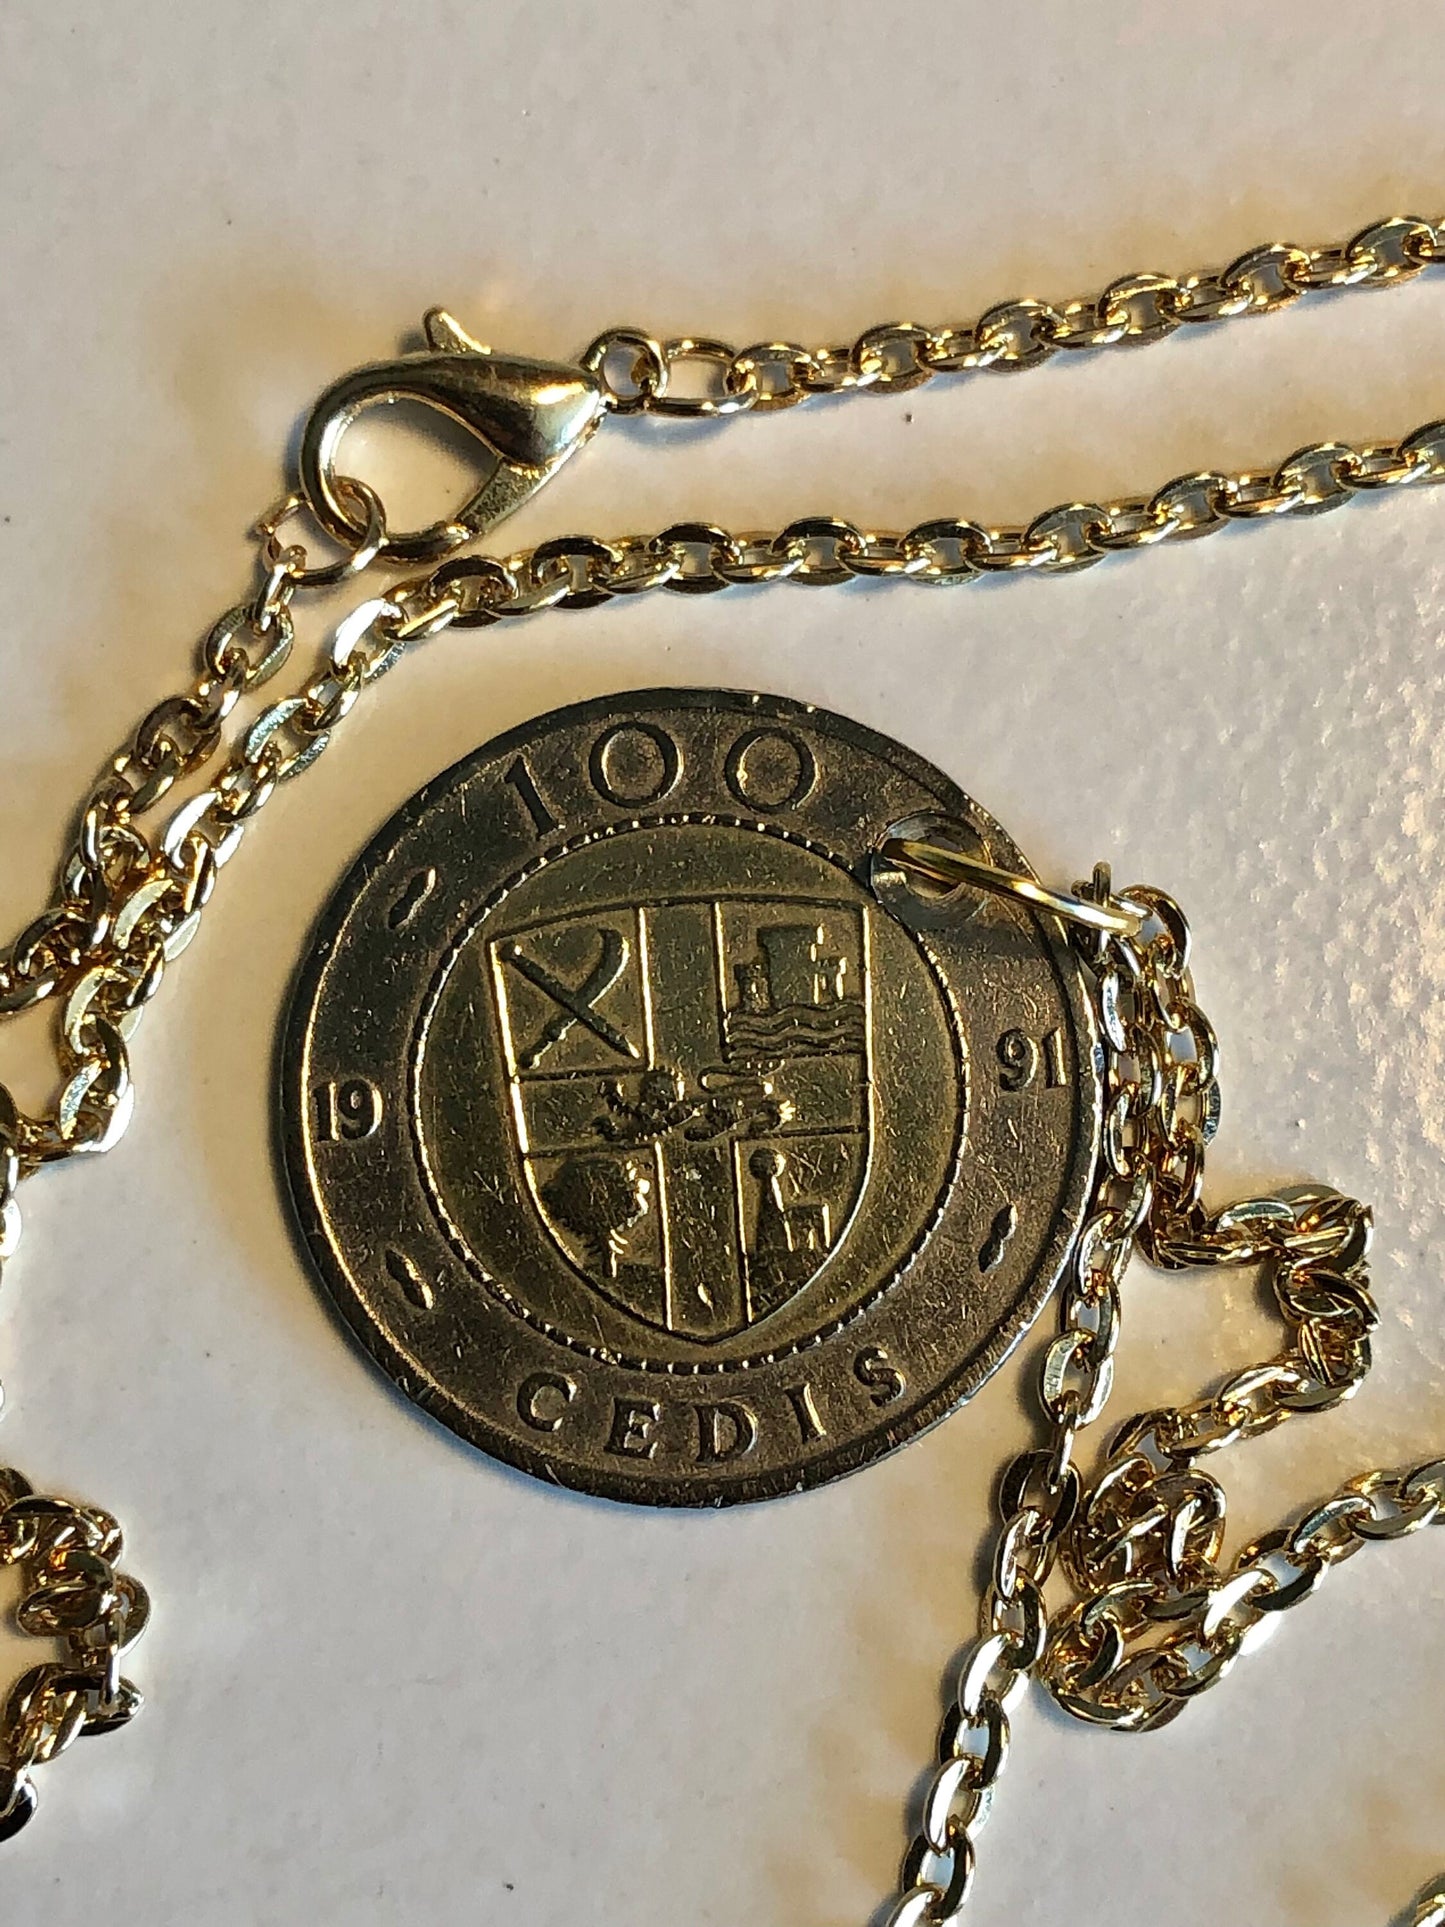 Ghana Coin Pendant 100 Cedis 1991 Personal Necklace Old Vintage Handmade Jewelry Gift Friend Charm For Him Her World Coin Collector